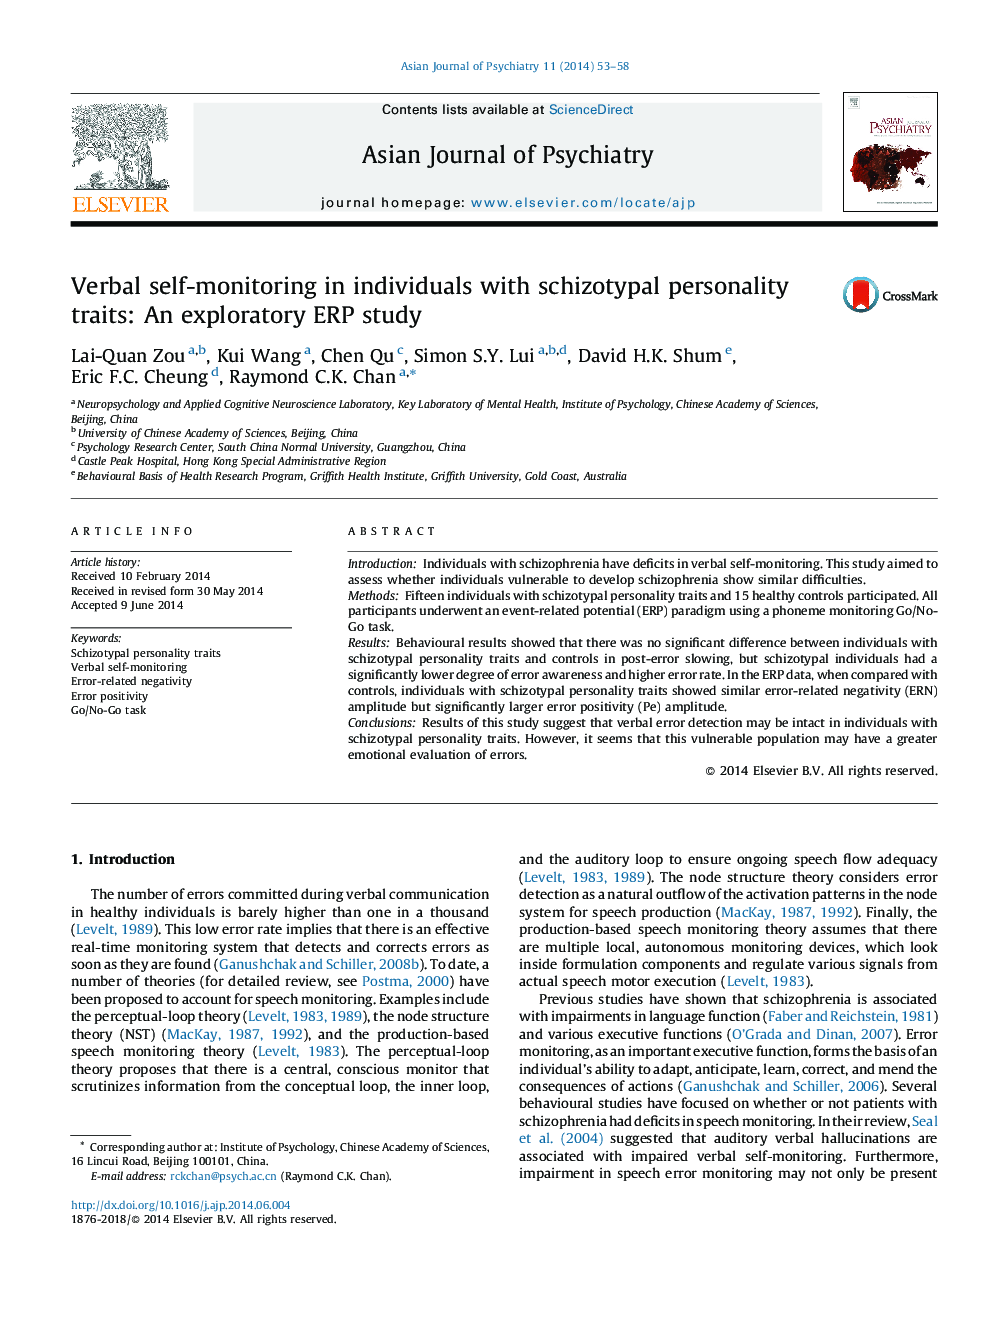 Verbal self-monitoring in individuals with schizotypal personality traits: An exploratory ERP study